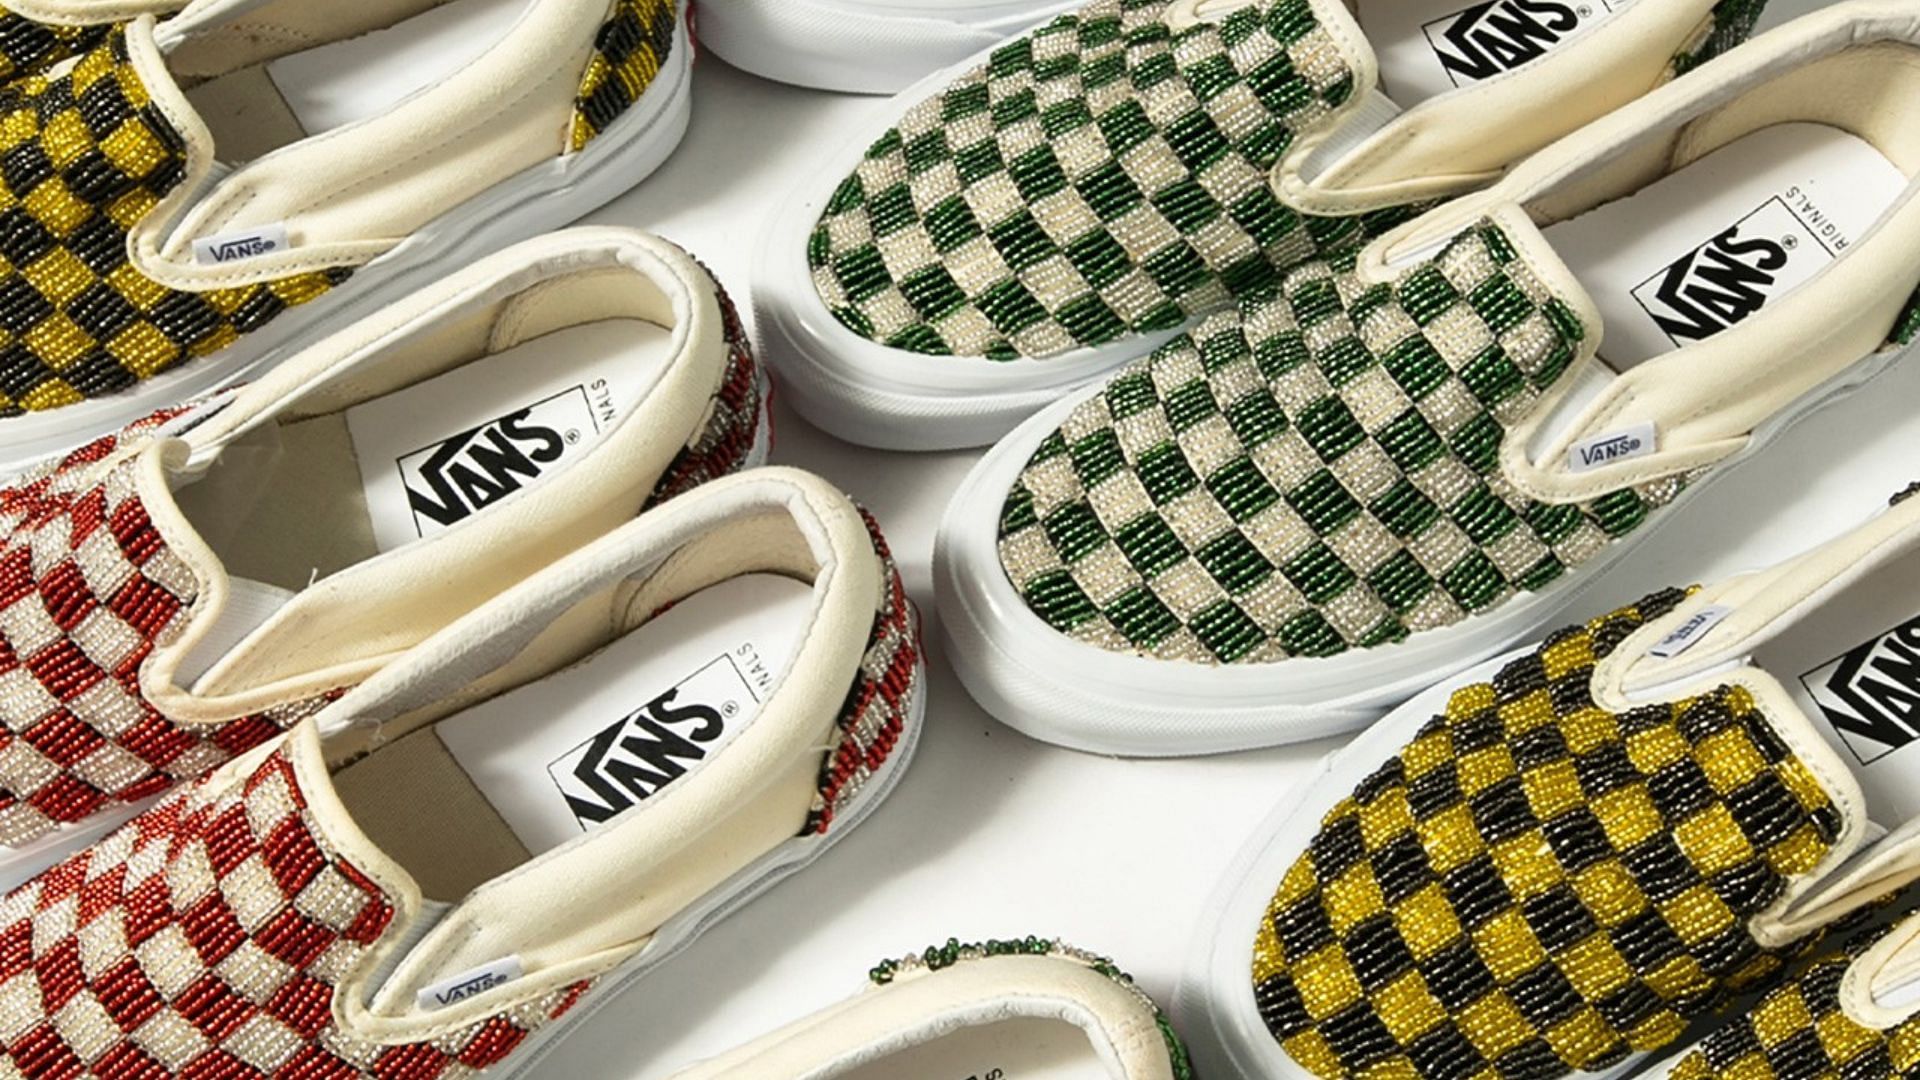 One Block Down x Vans Classic Slip-on capsule collection (Image via One Block Down)